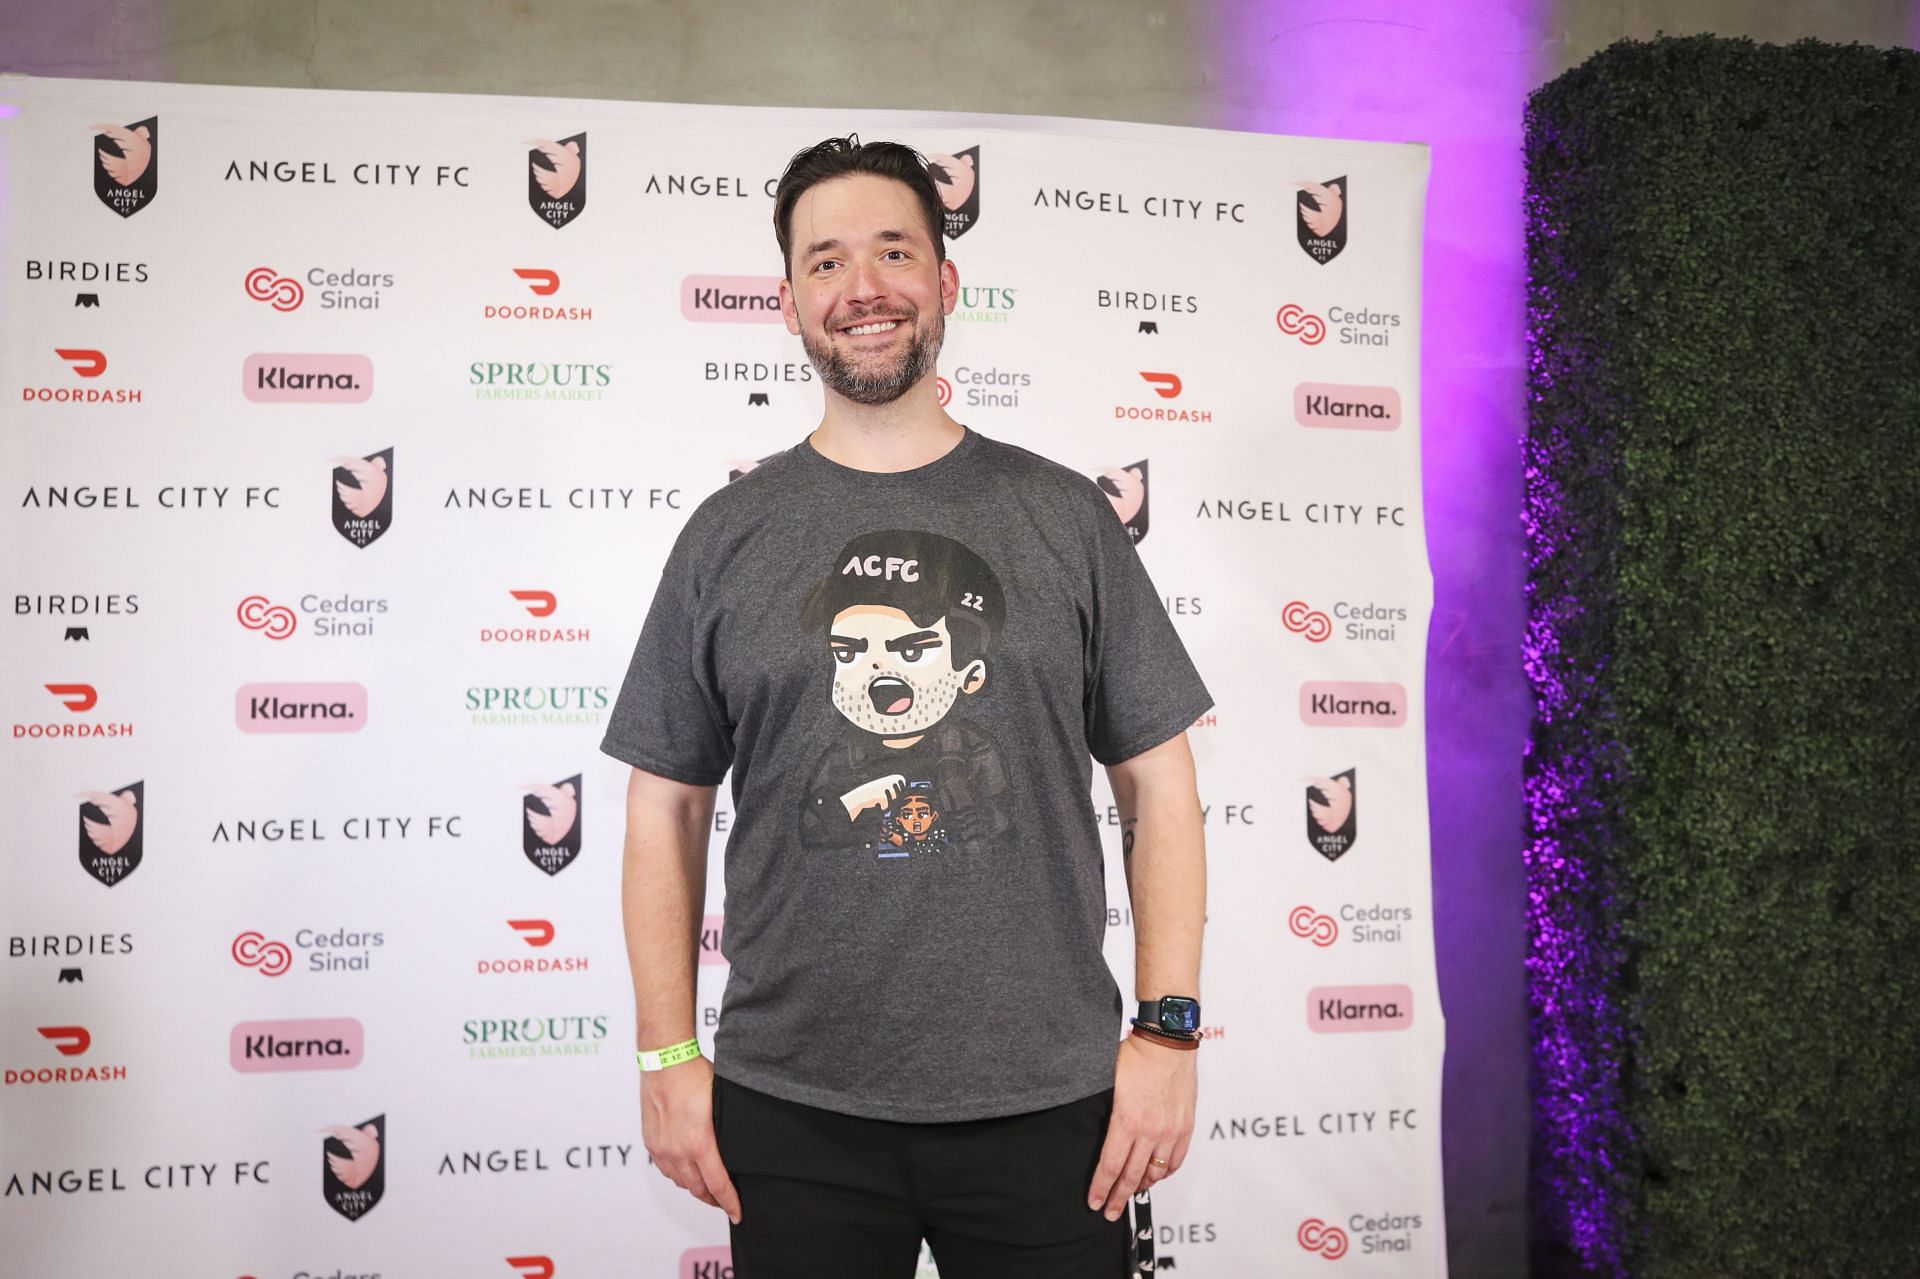 Serena Williams&#039; husband Alexis Ohanian attending a match of Angel City FC